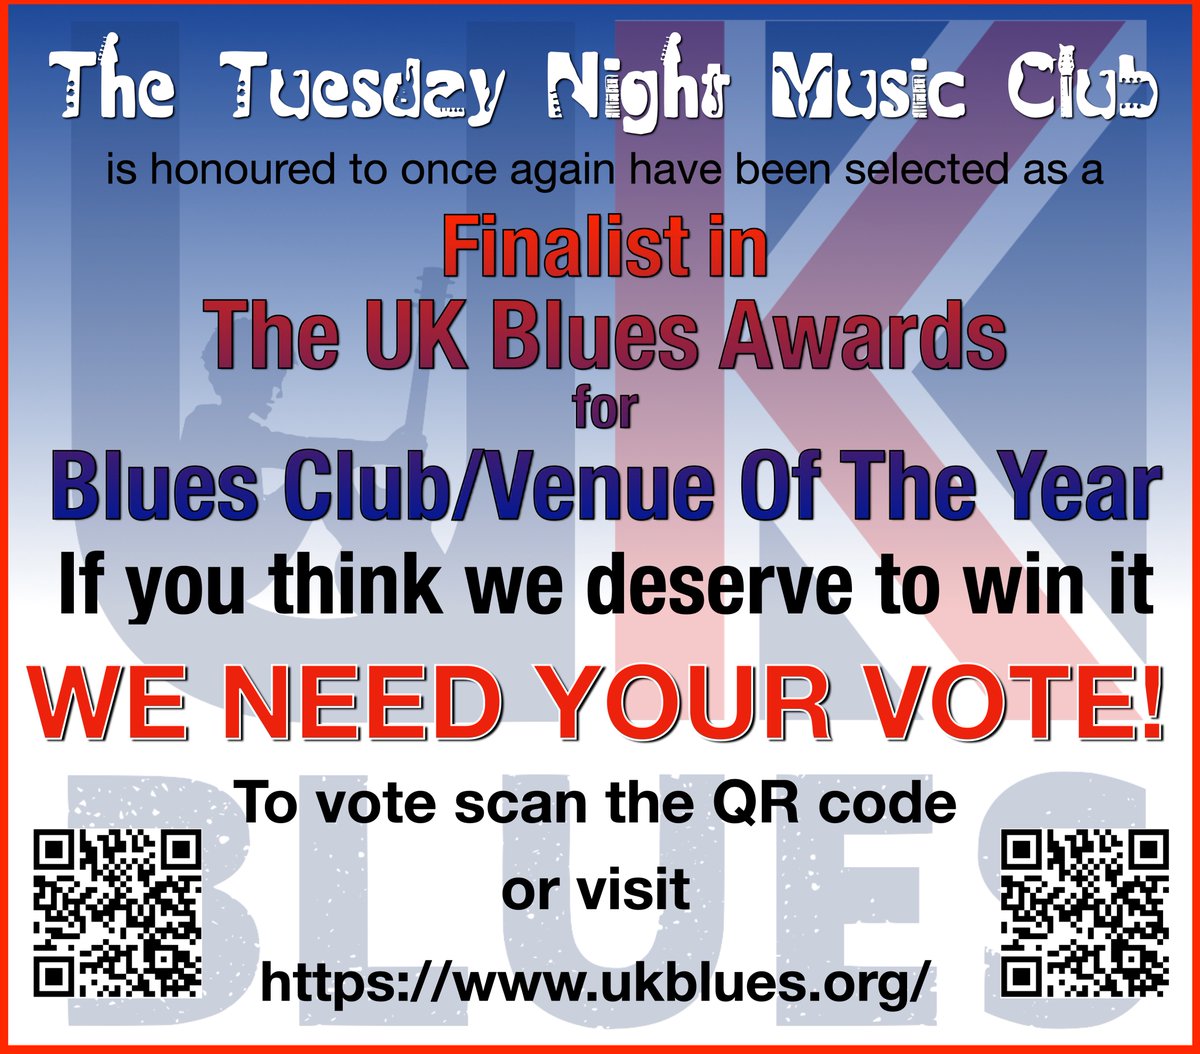 A little Club in Coulsdon up for a National Award? Yes it is! You can help @The_TNMC win in The UK Blues Awards! It's all down to a public vote so get voting at UKBlues.org! @bbcsurrey @AmannyMo @whatsoninsurrey @SurreyLife @surreylive @WRINKLYCLUB @gr8musicvenues